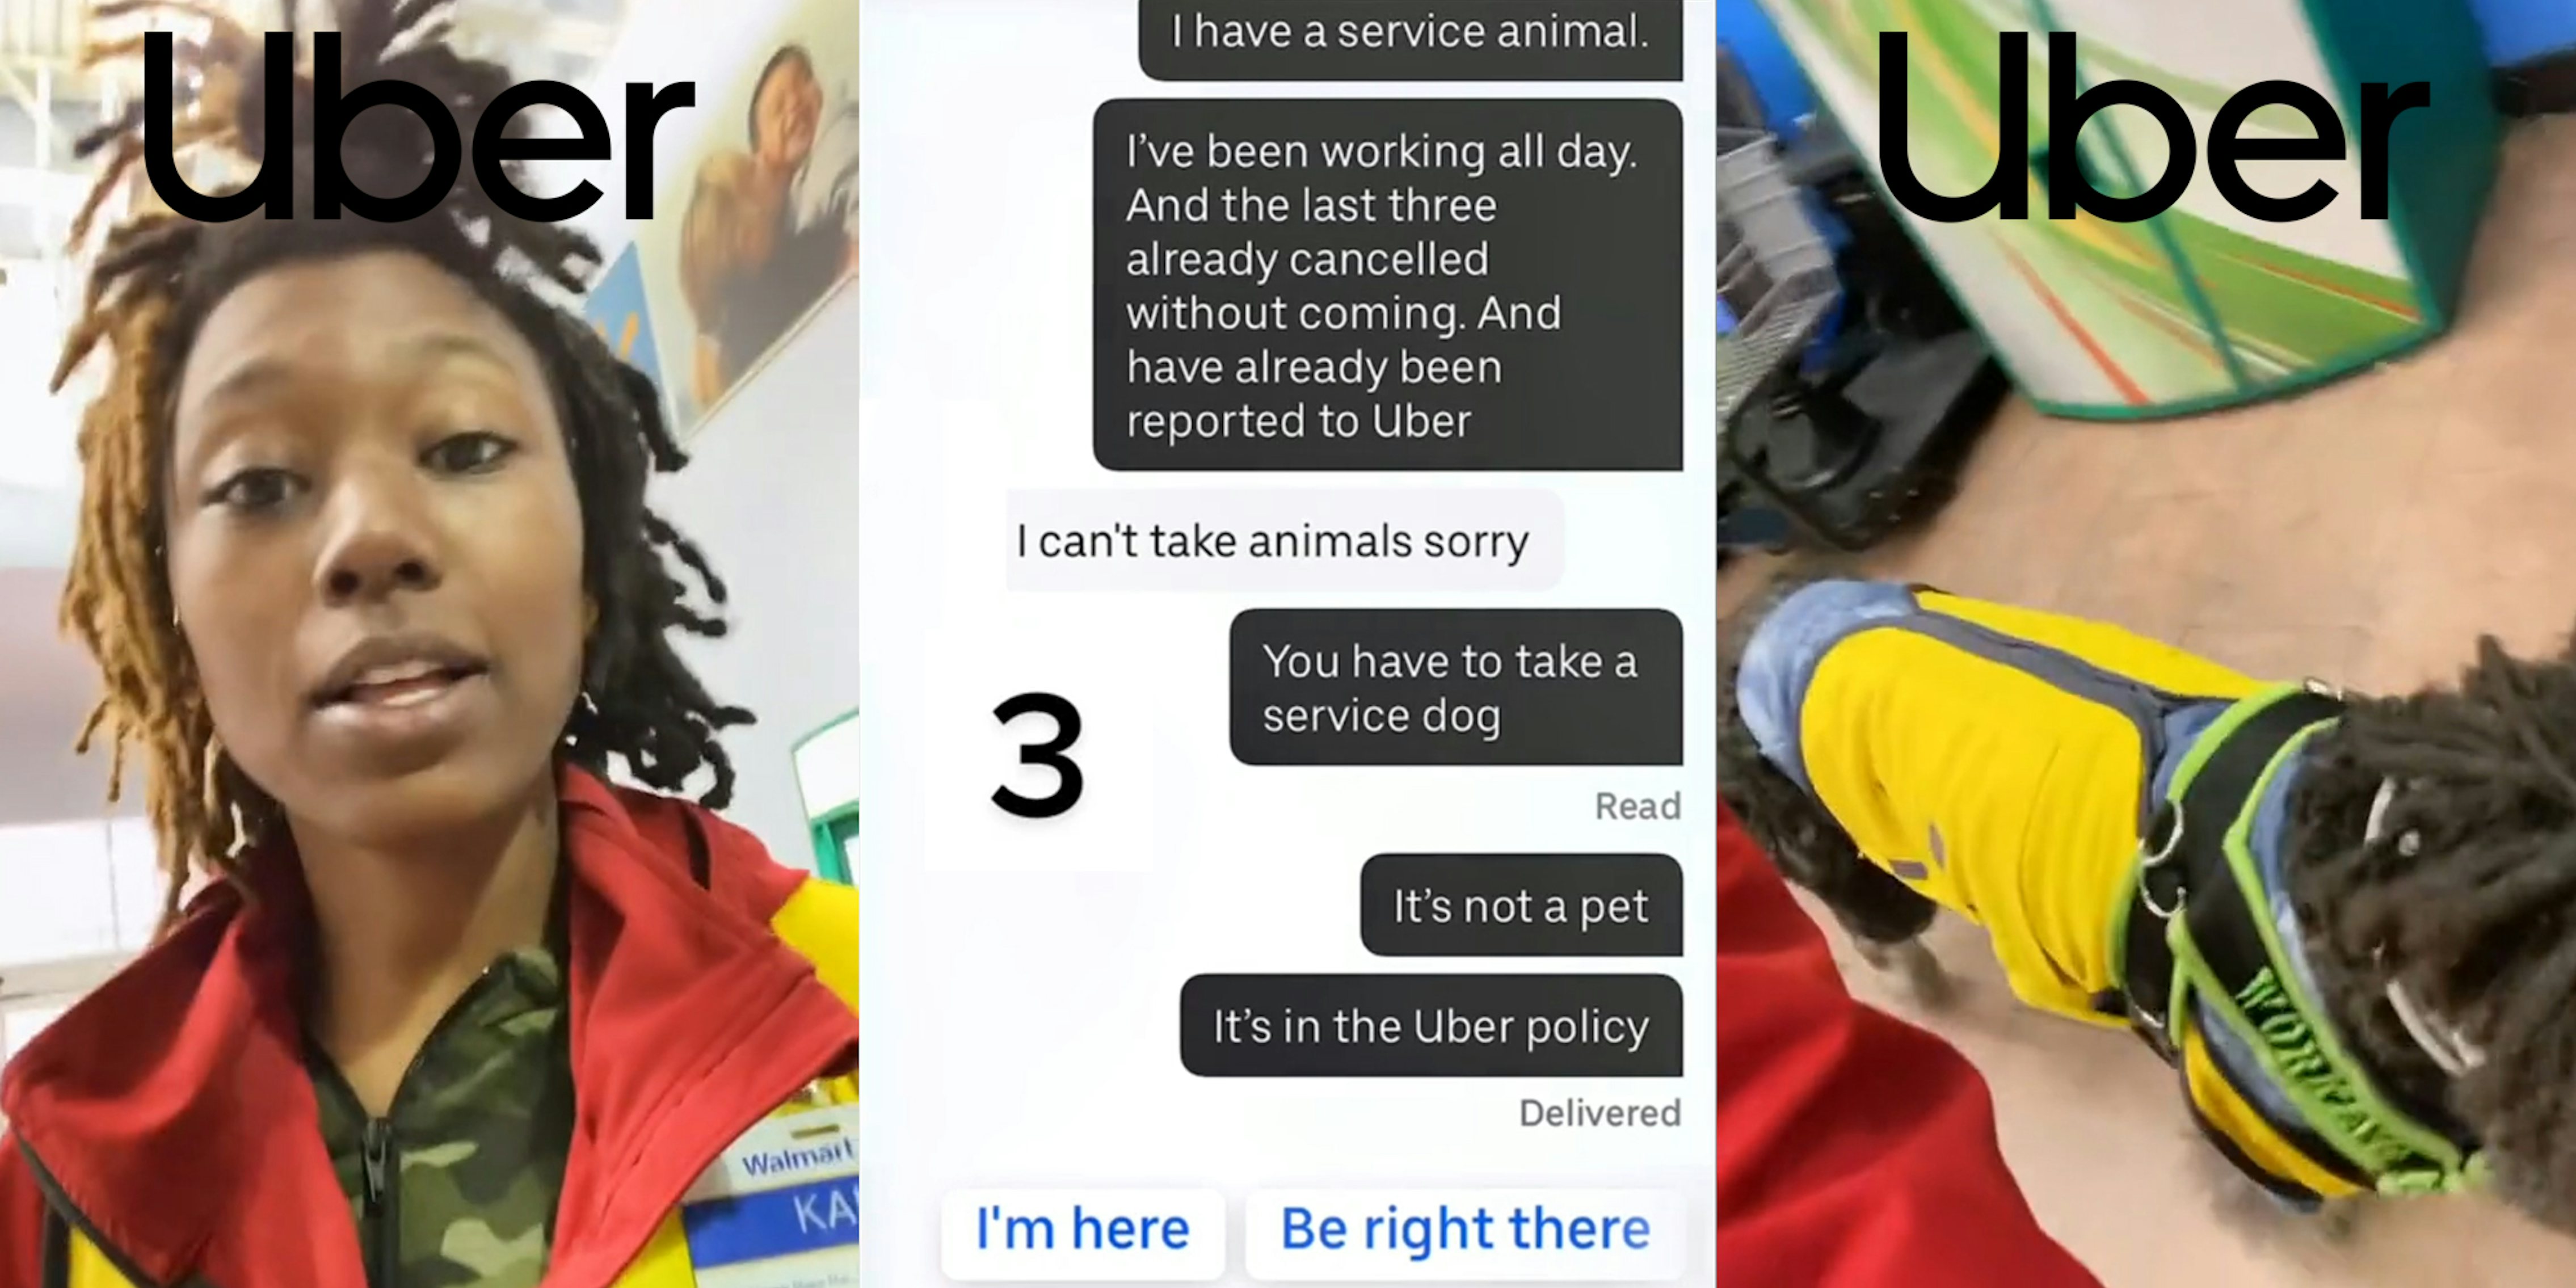 Walmart employee speaking with Uber logo above (l) messages between Uber driver and Walmart employee 'I have a service animal. I've been working all day. And the last three already cancelled without coming. And have already been reported to Uber. I can't take animals sorry You have to take a service dog It's not a pet. It's in the Uber policy' '3' (c) Service dog walking with Uber logo above (r)